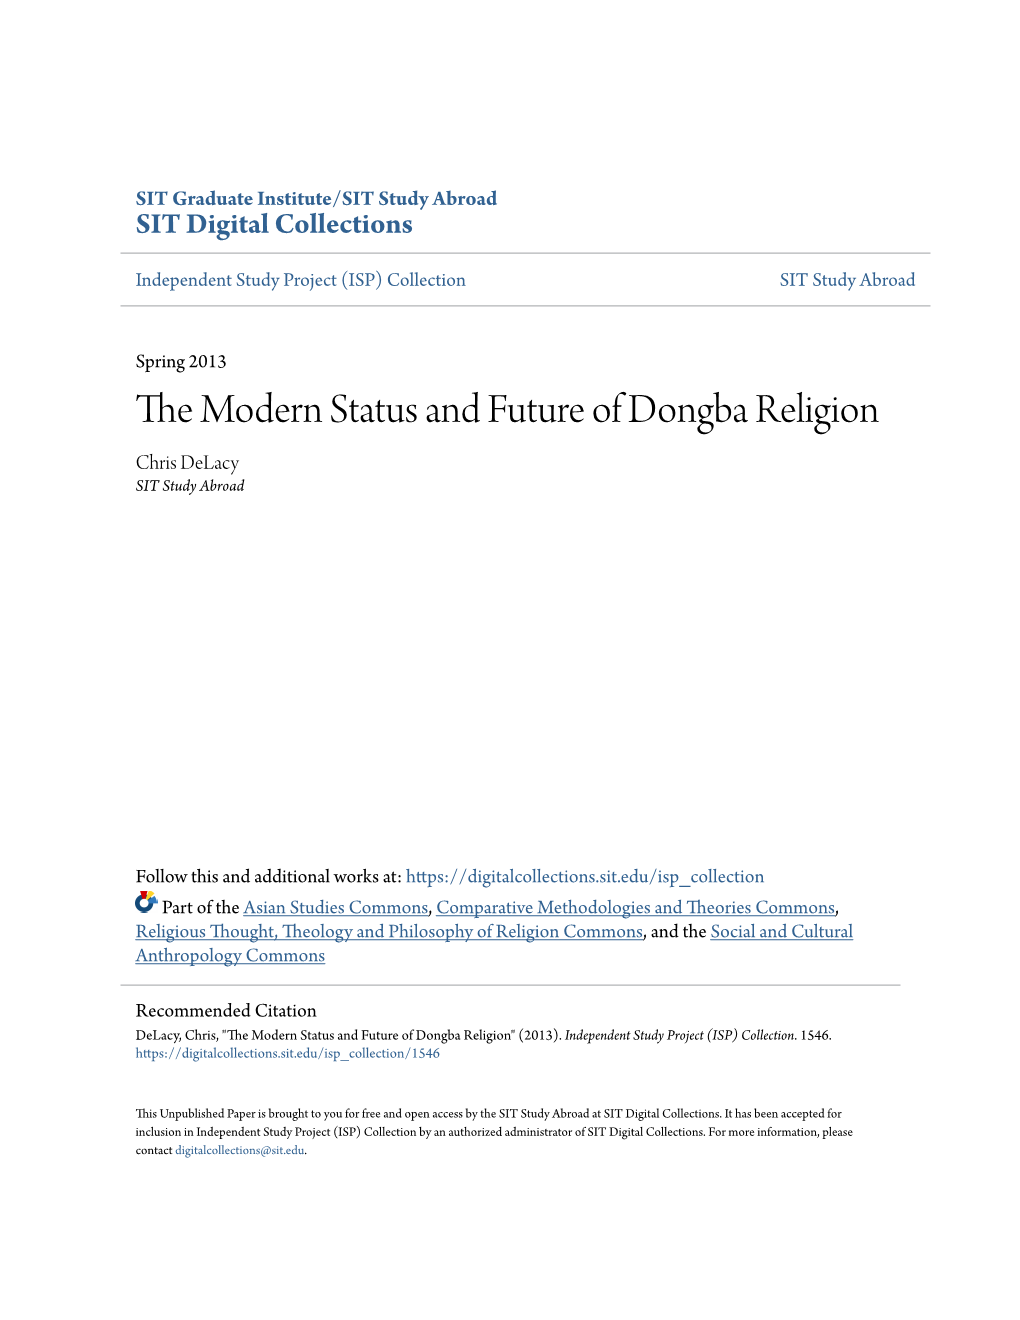 The Modern Status and Future of Dongba Religion